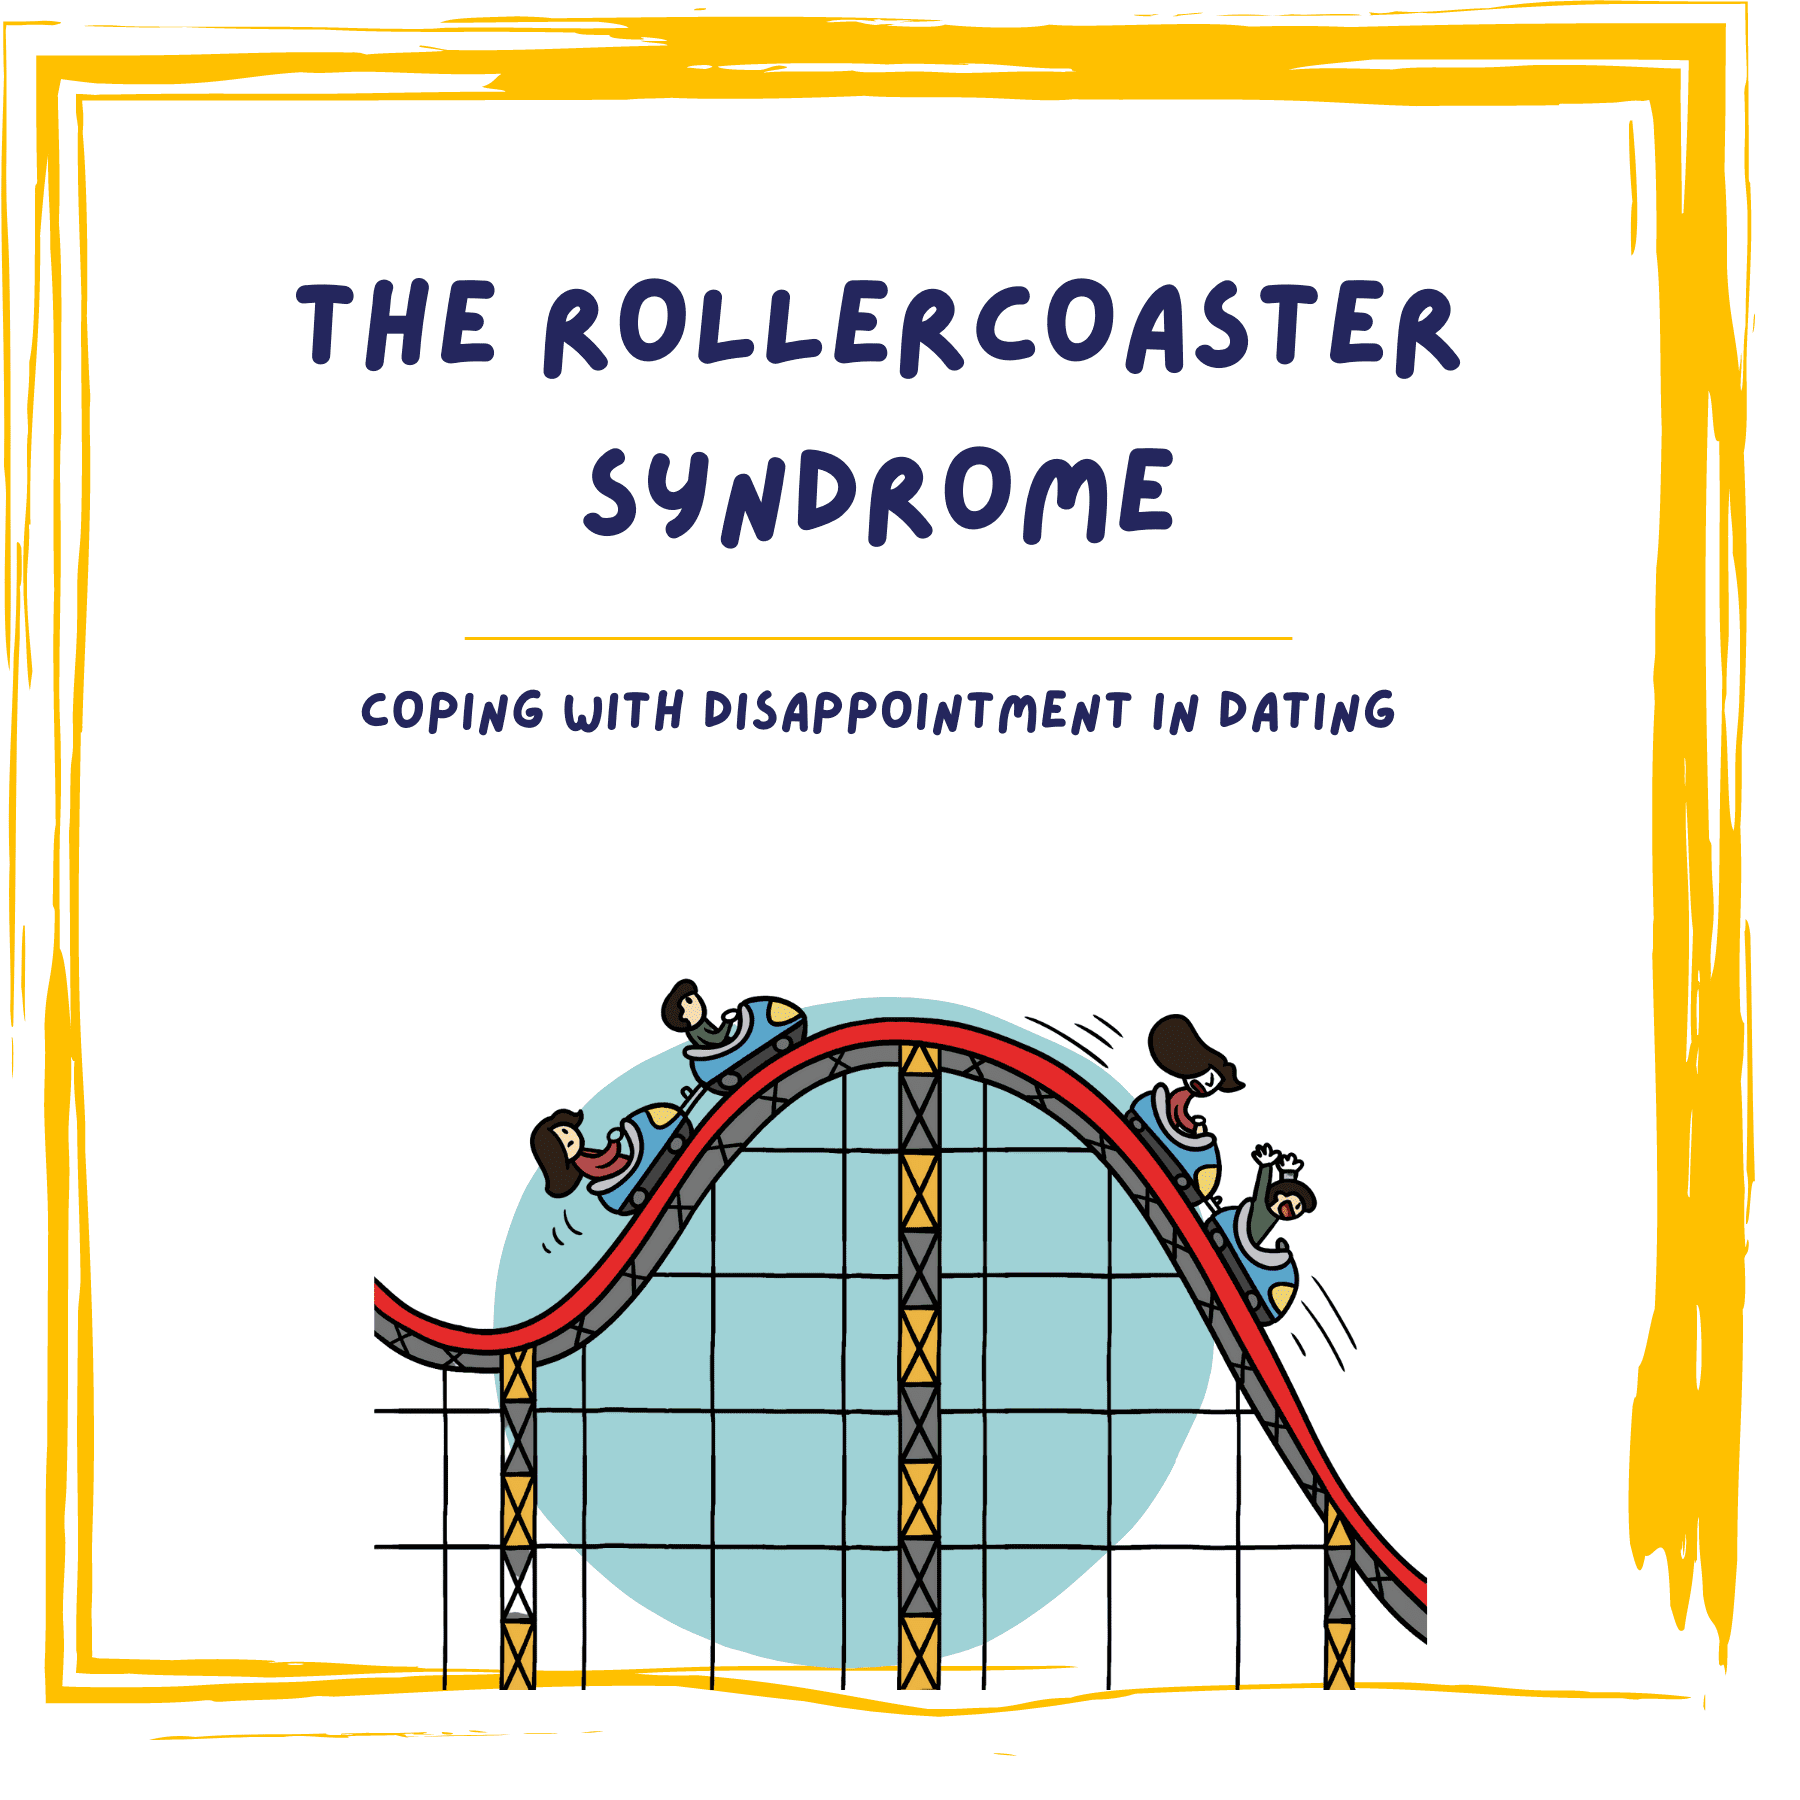 The Rollercoaster Syndrome